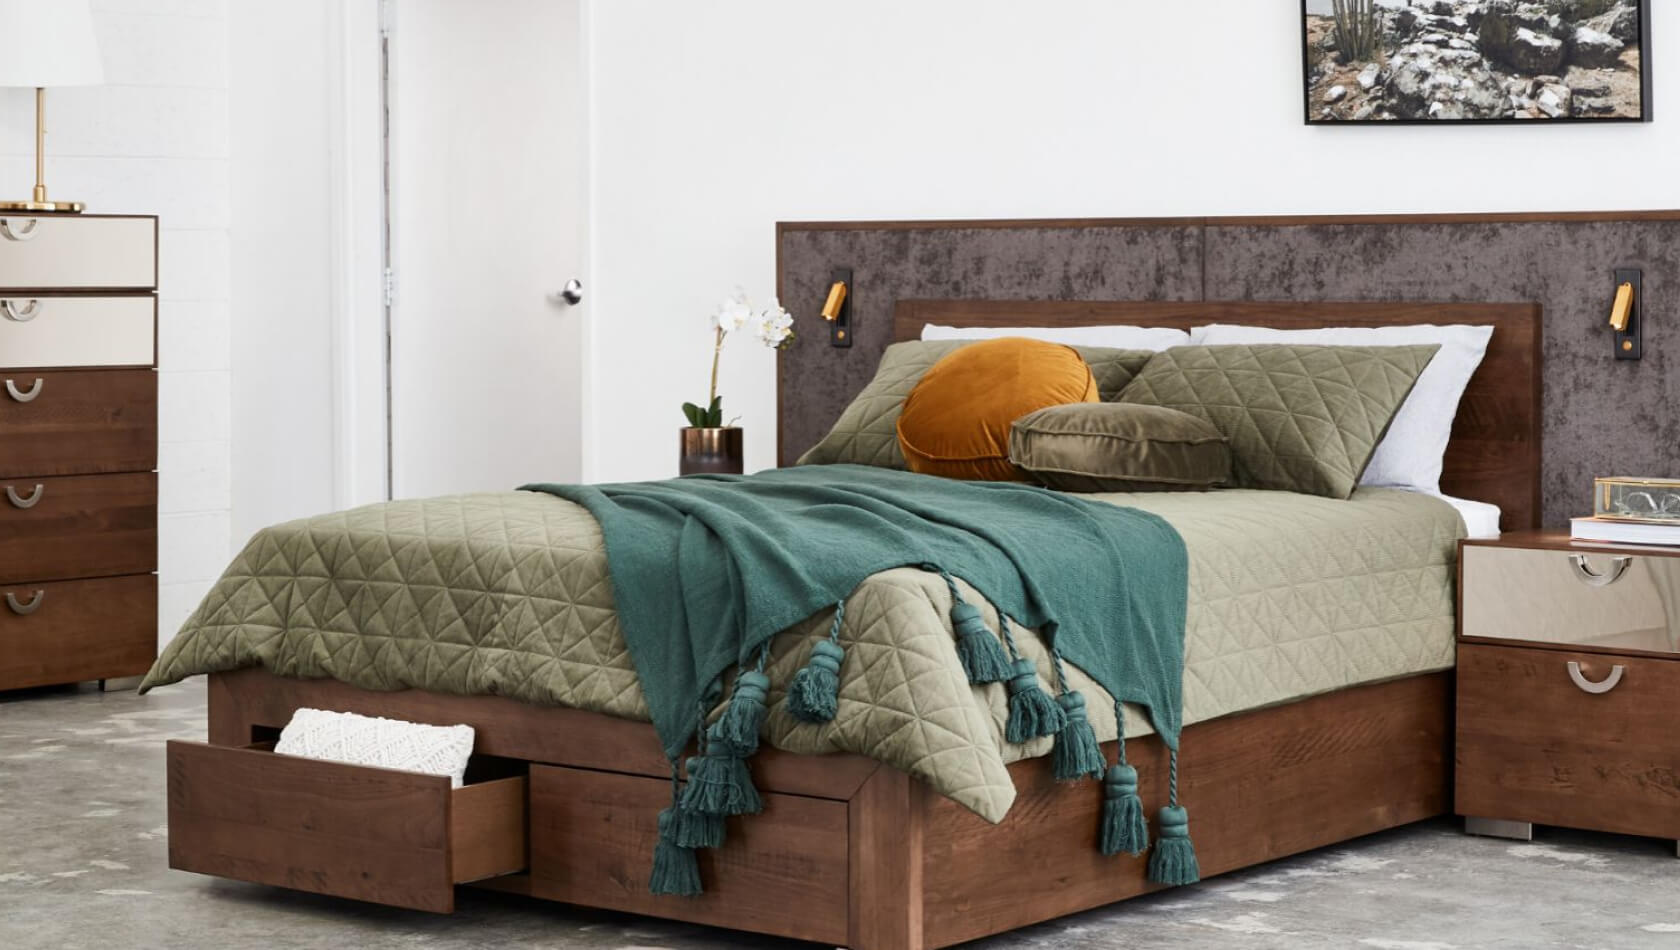 The Messina timber upholstered bed frame